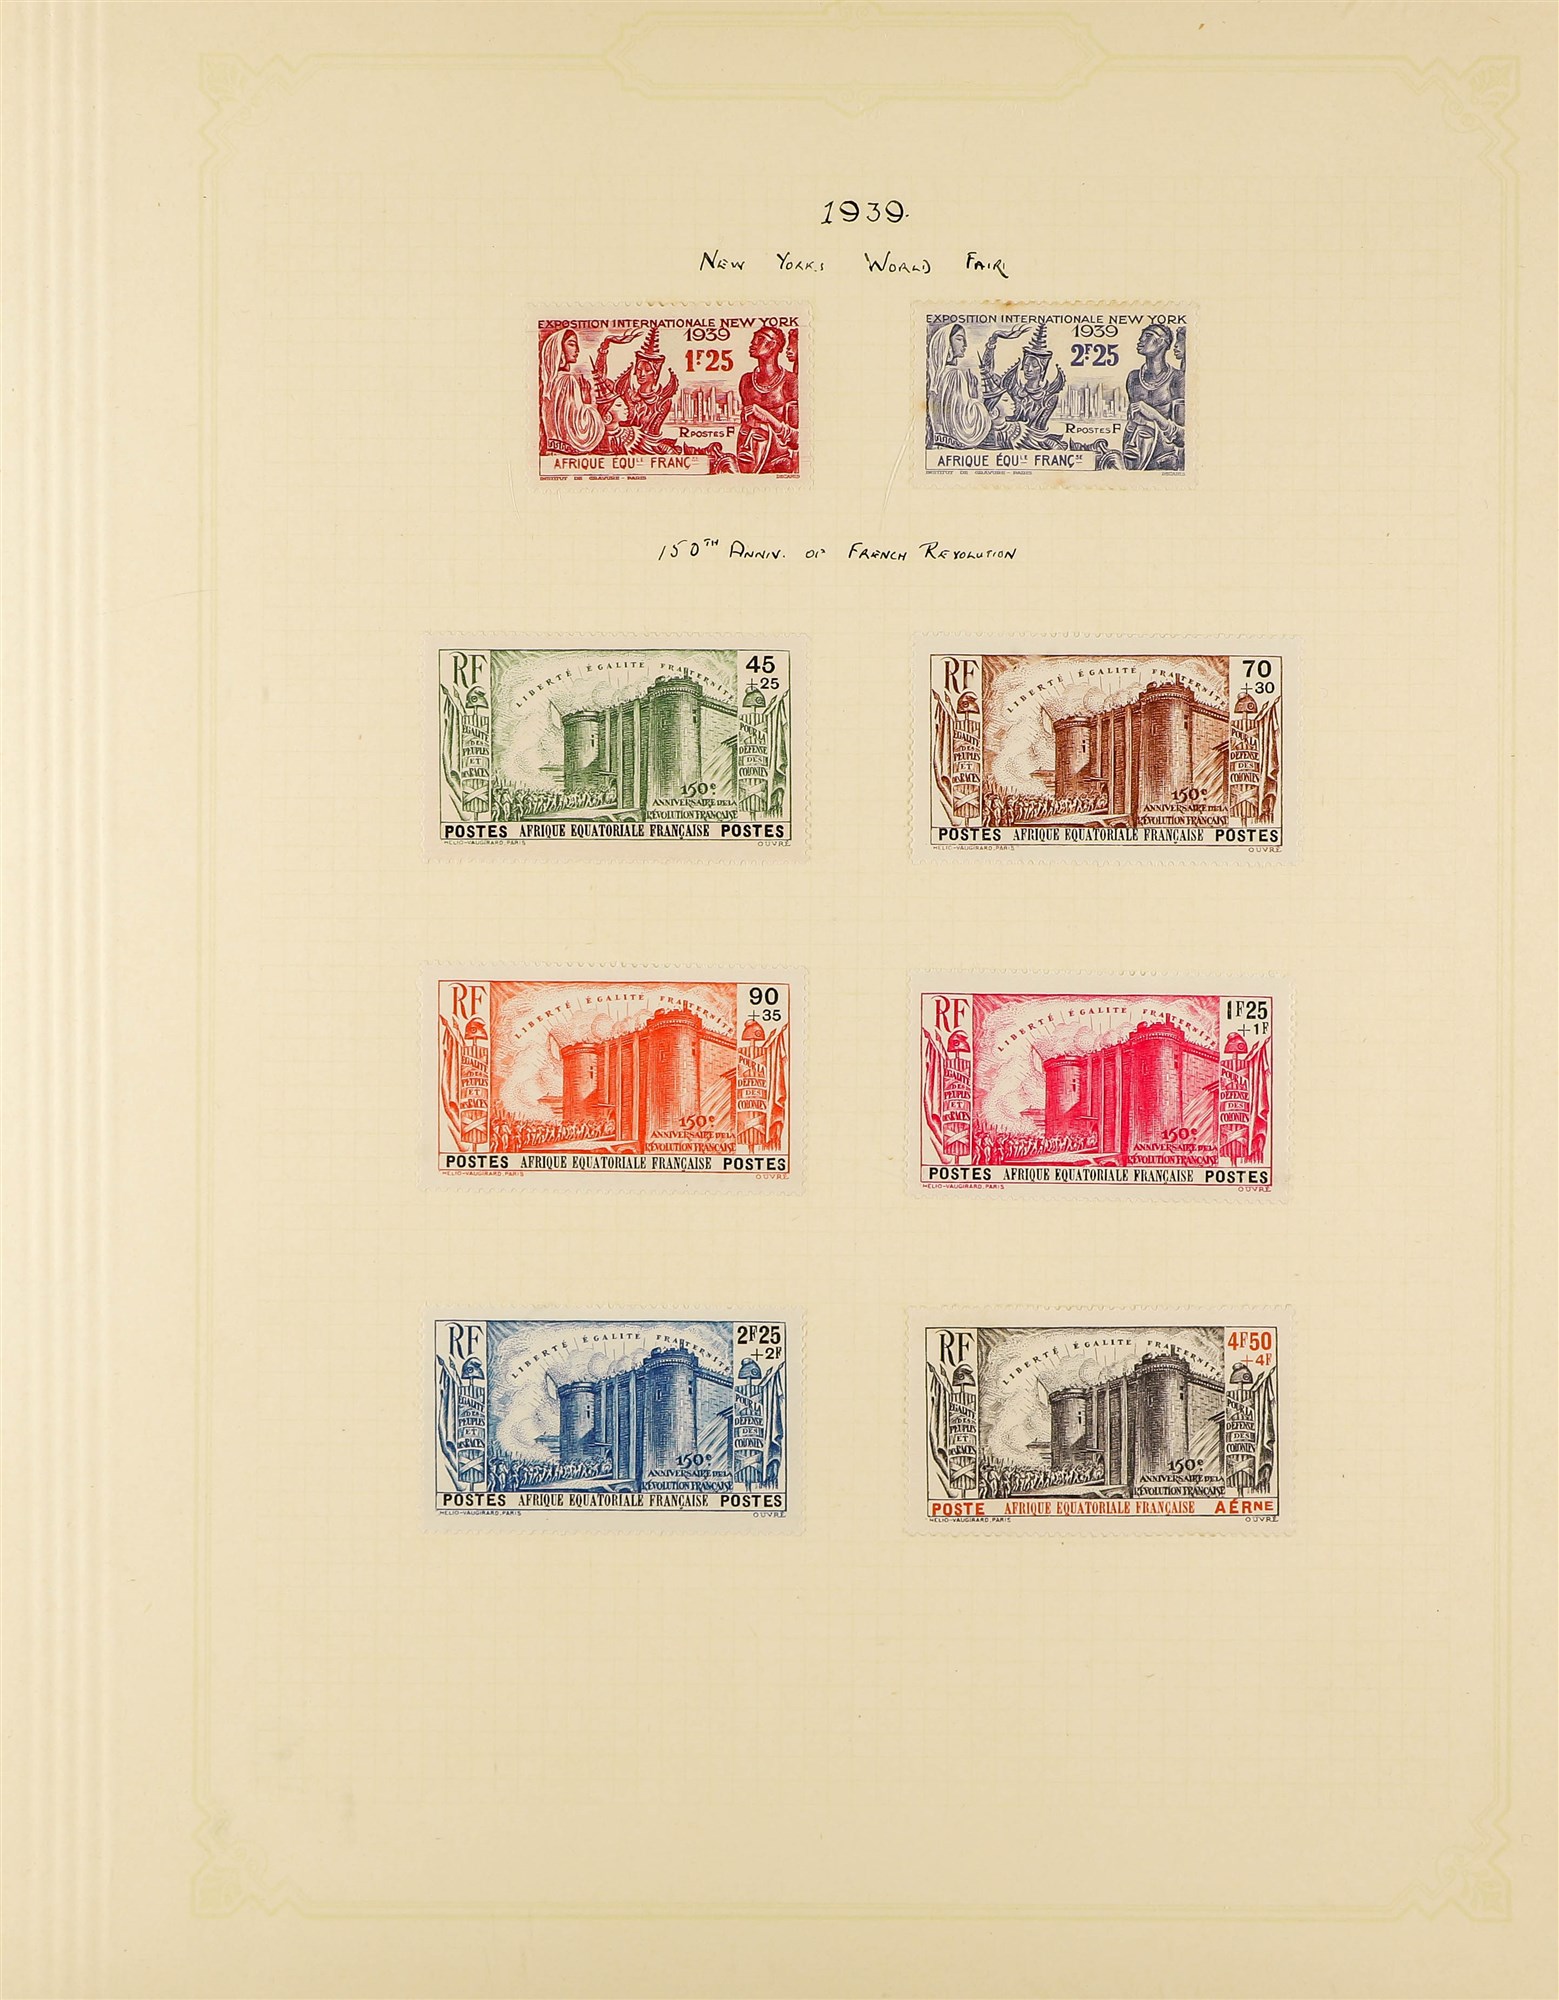 FRENCH COLONIES EQUATORIAL AFRICA 1936 - 1957 comprehensive collection of mint stamps on album pages - Image 6 of 16